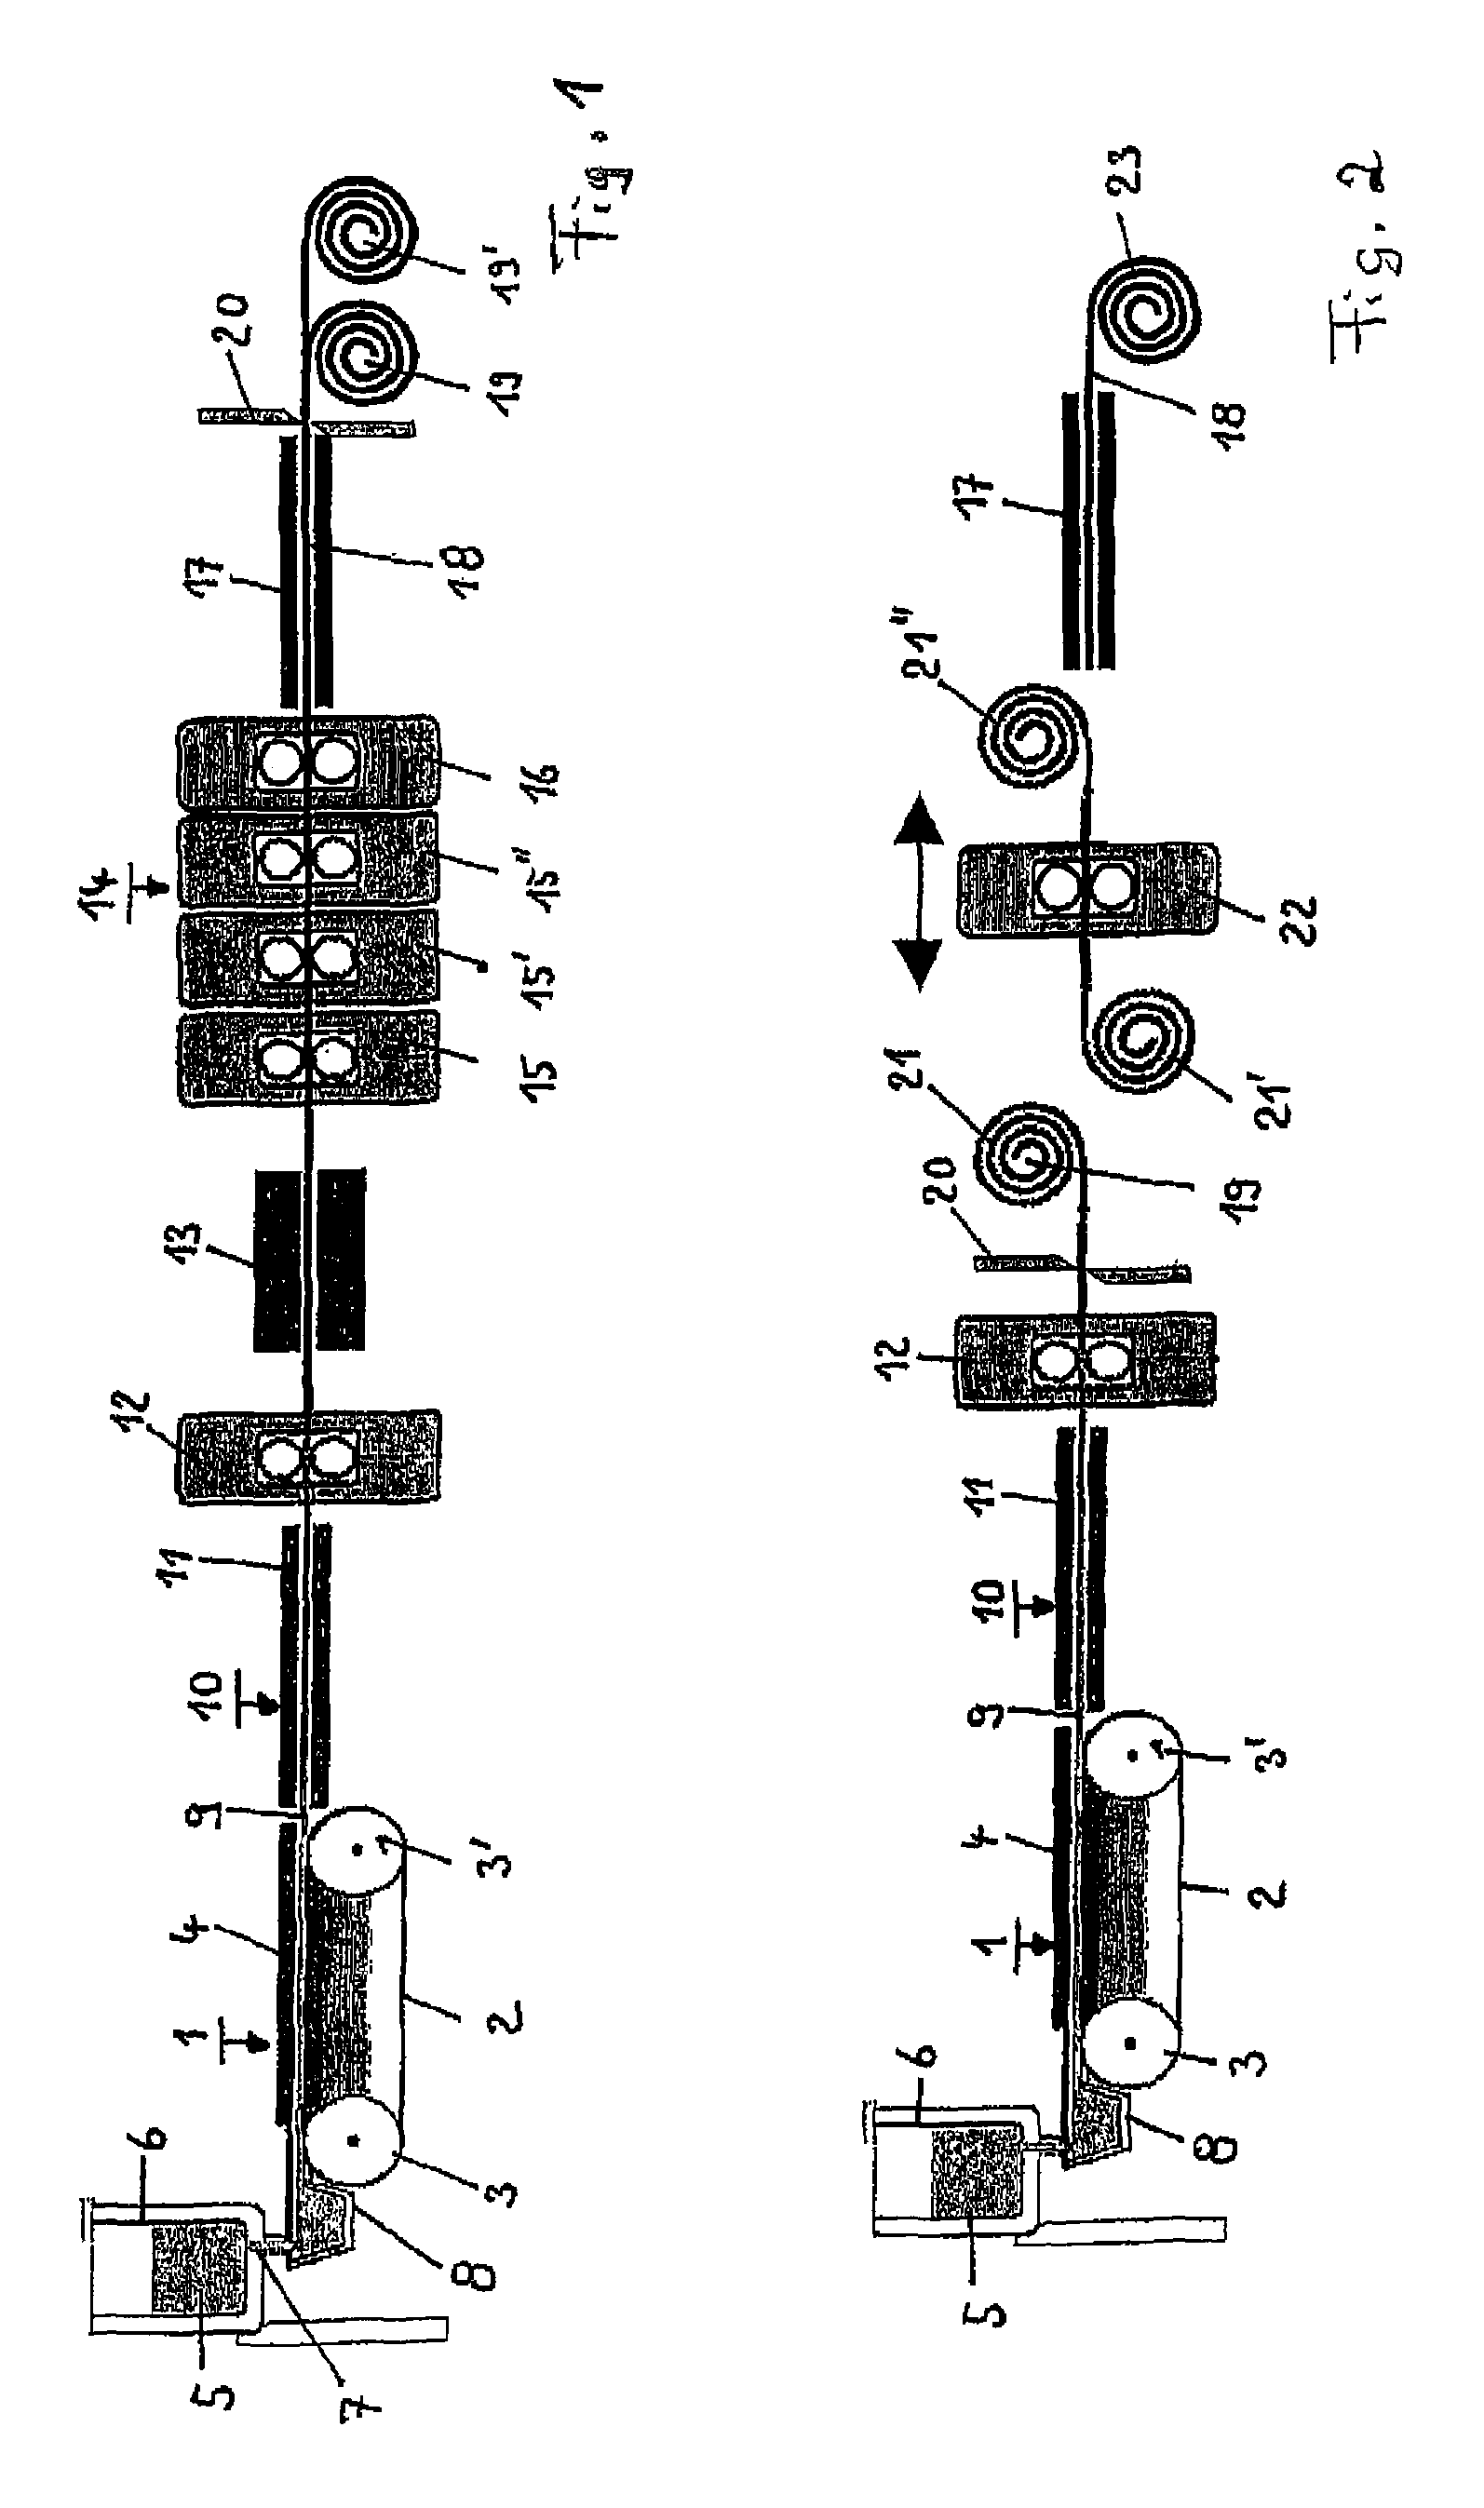 Method for producing hot strips from lightweight steel